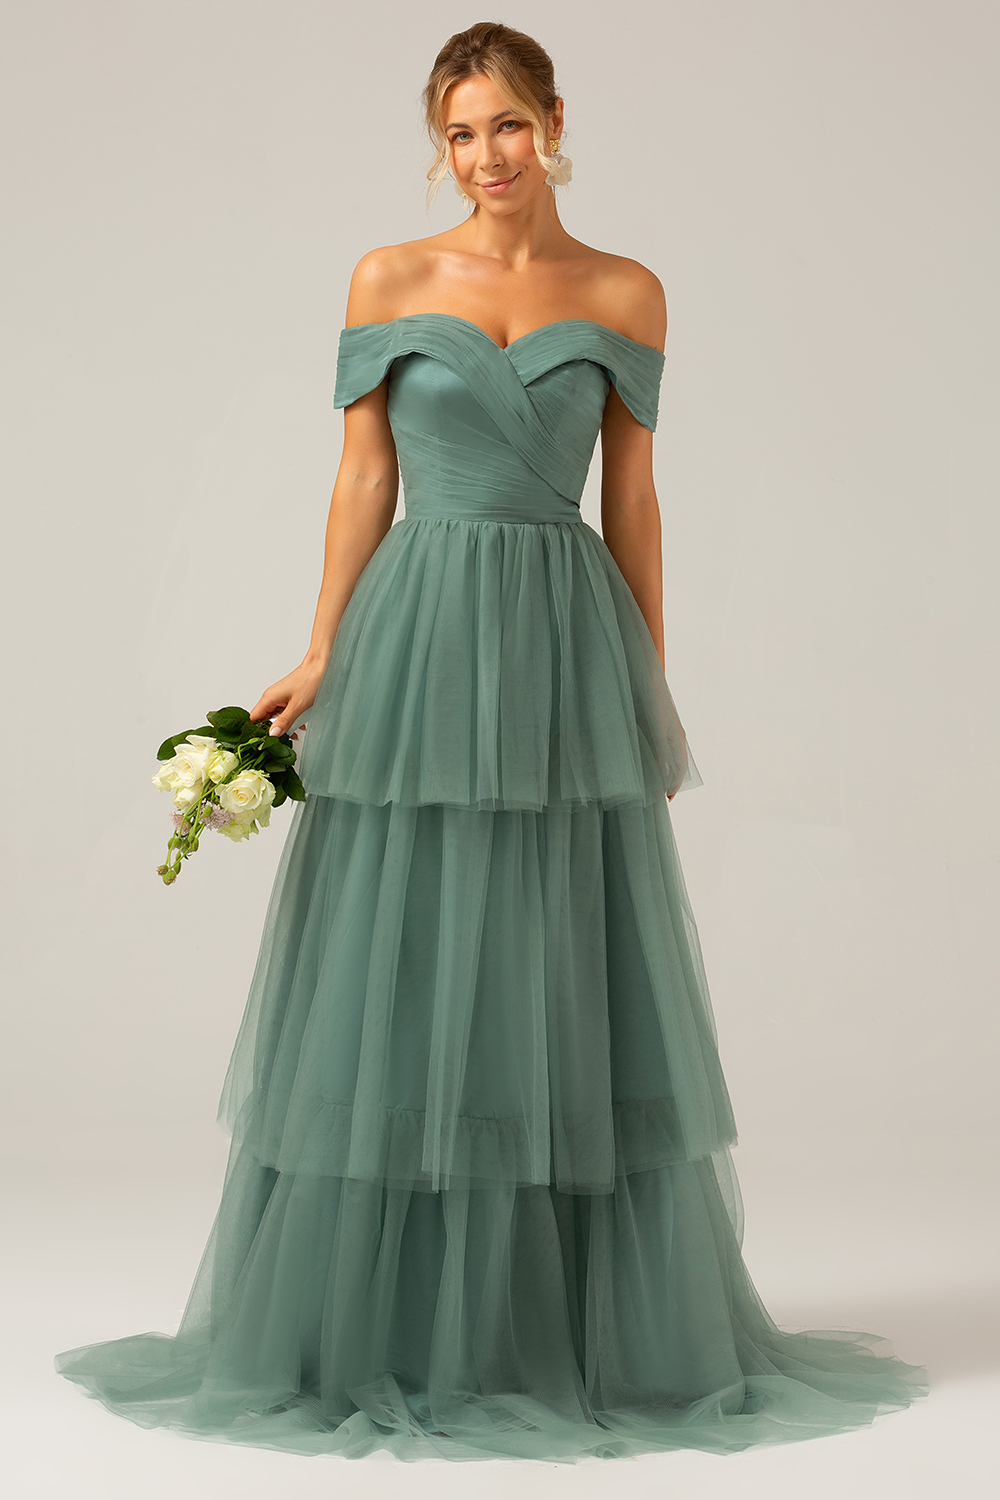 Leely Women Grey Green Off the Shoulder Bridesmaid Dress A Line Tulle Tiered Wedding Guest Dress